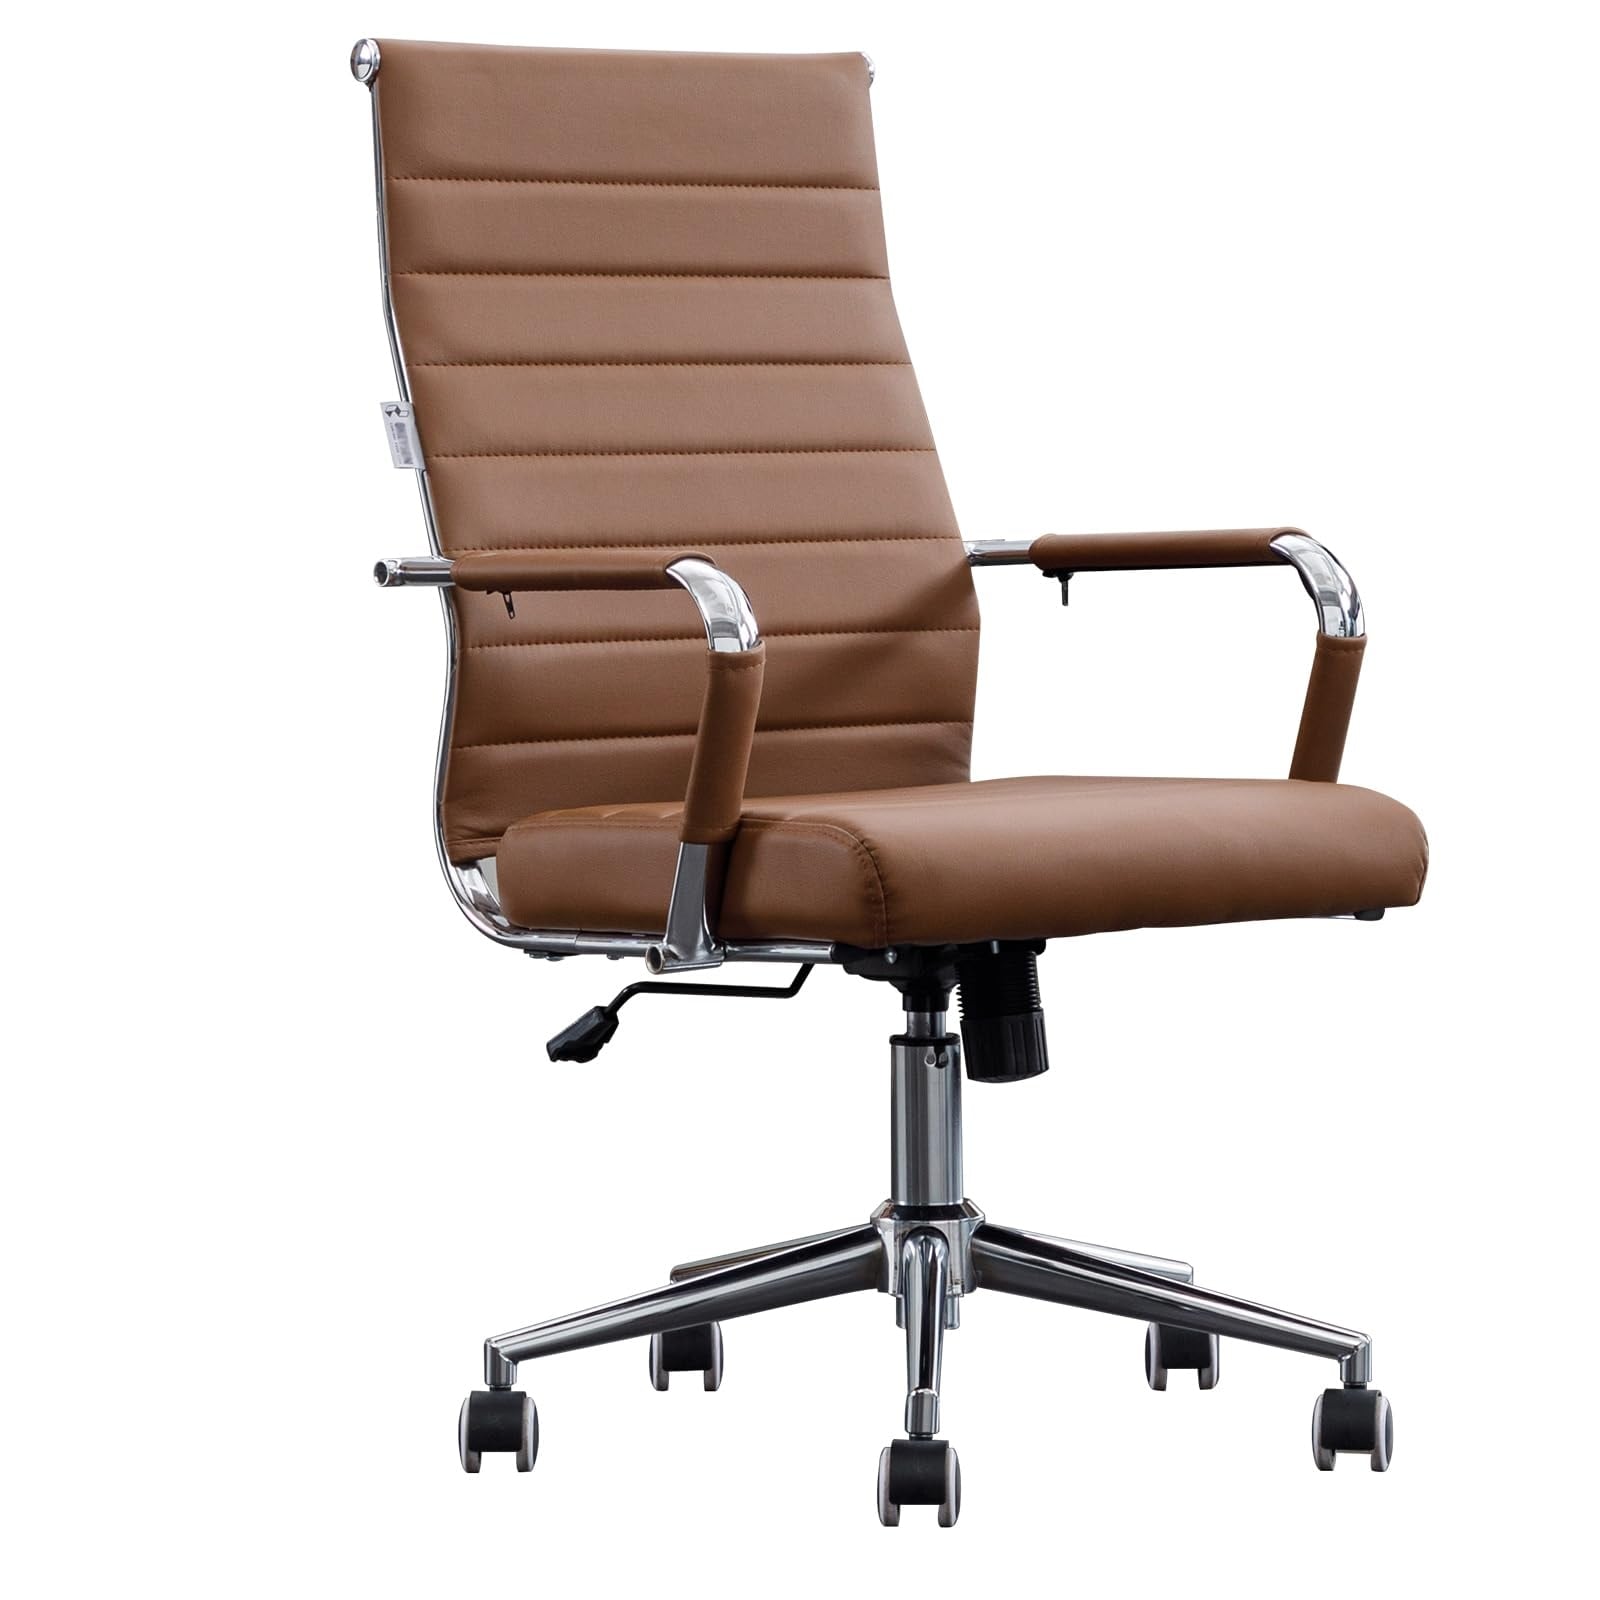 Beige Executive Chairs - Bed Bath & Beyond